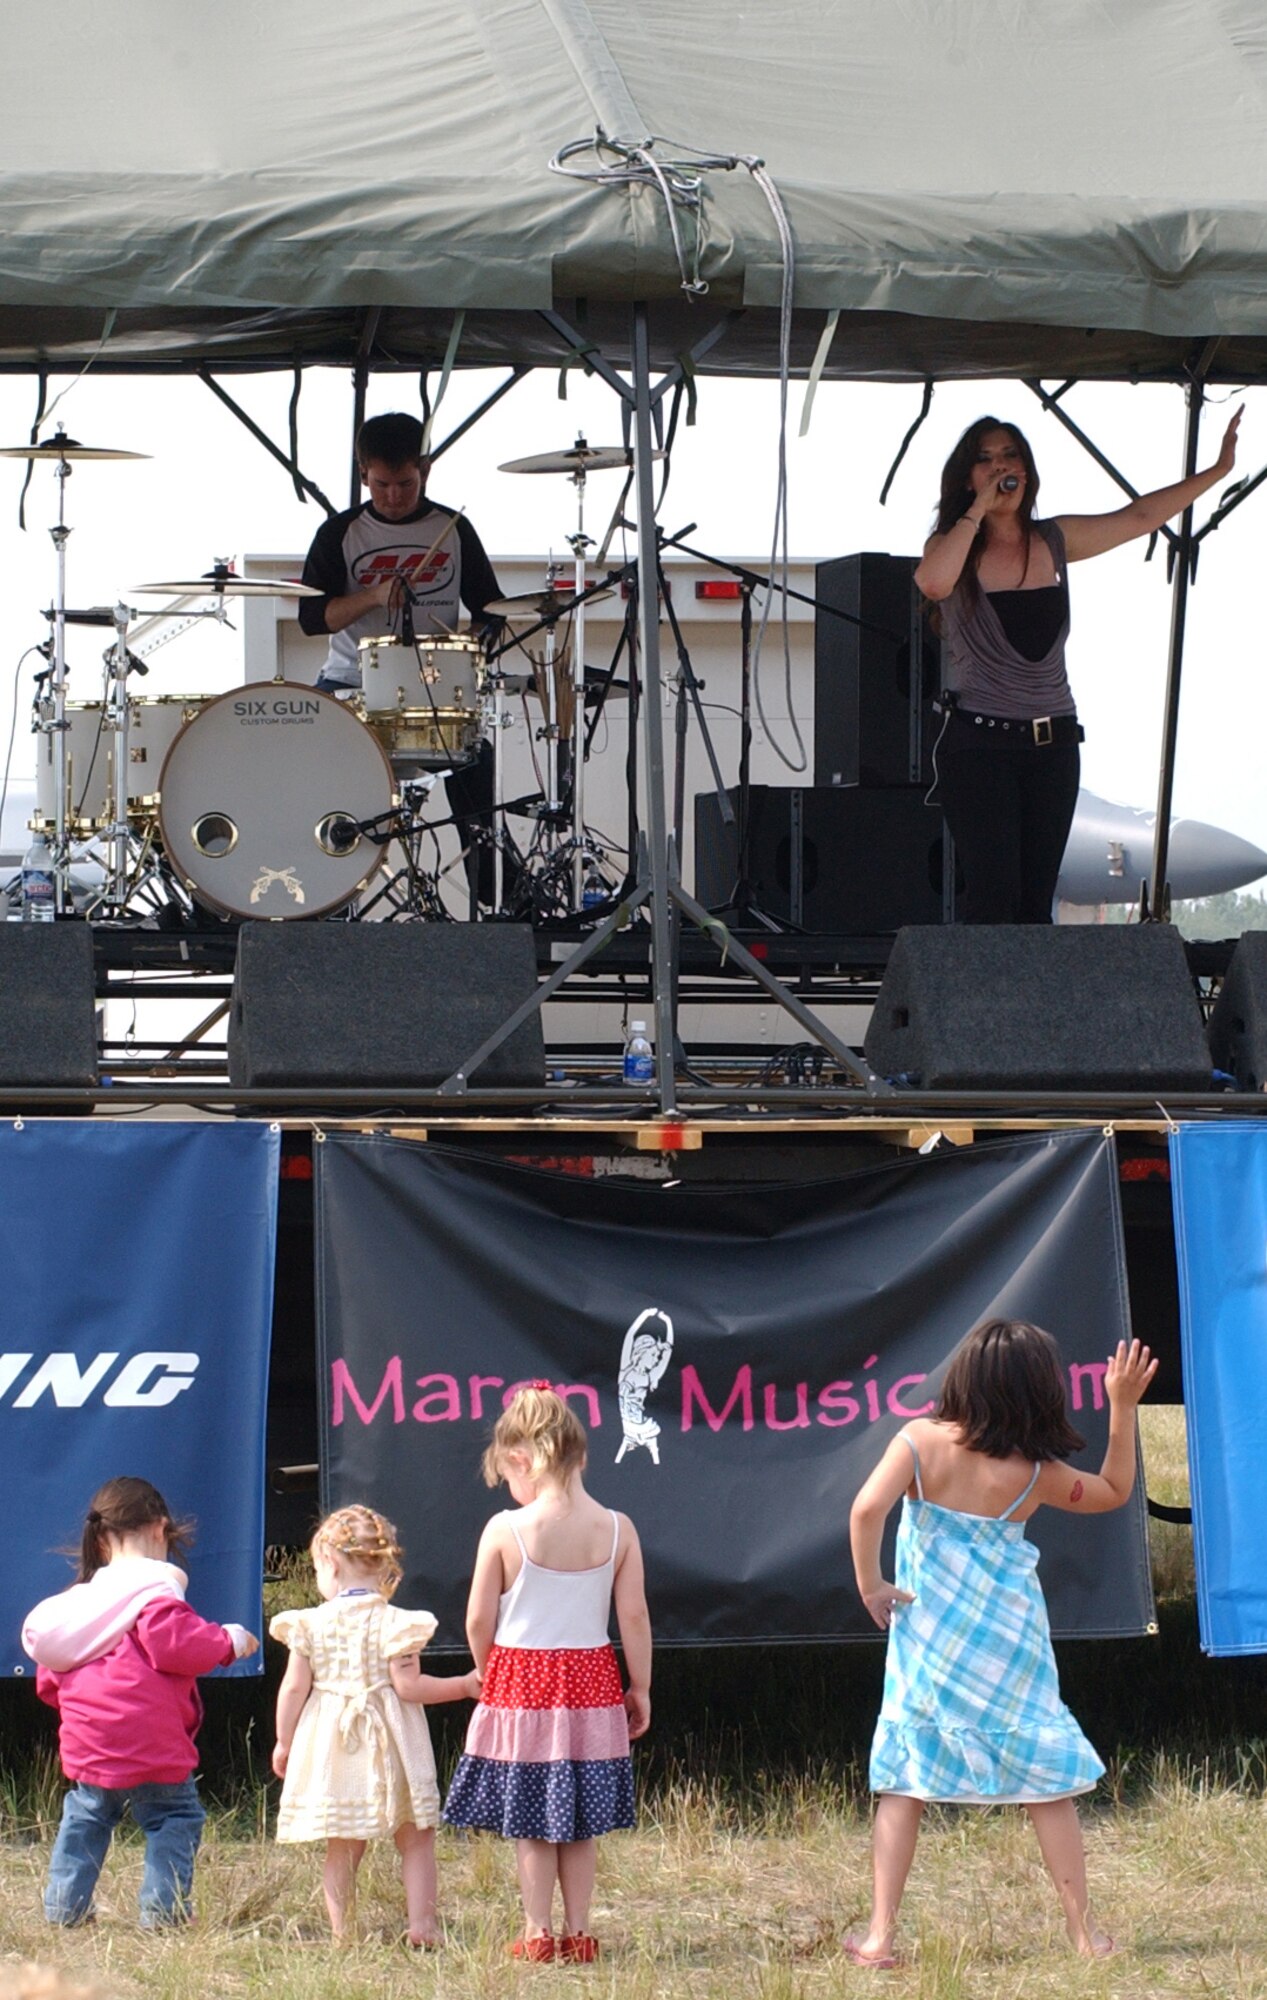 EIELSON AIR FORCE BASE, Alaska--Four young Maren fans dance in step to the lyrics of the band Maren June 23. Texas roots-rocker Maren performed various songs during the all-day event featuring aerial and ground demonstrations including flybys, simulated airfield attacks, and aerobatic maneuvers as well as concessions, live music and many aircraft displays. (U.S. Air Force photo by Senior Airman Justin Weaver)                     